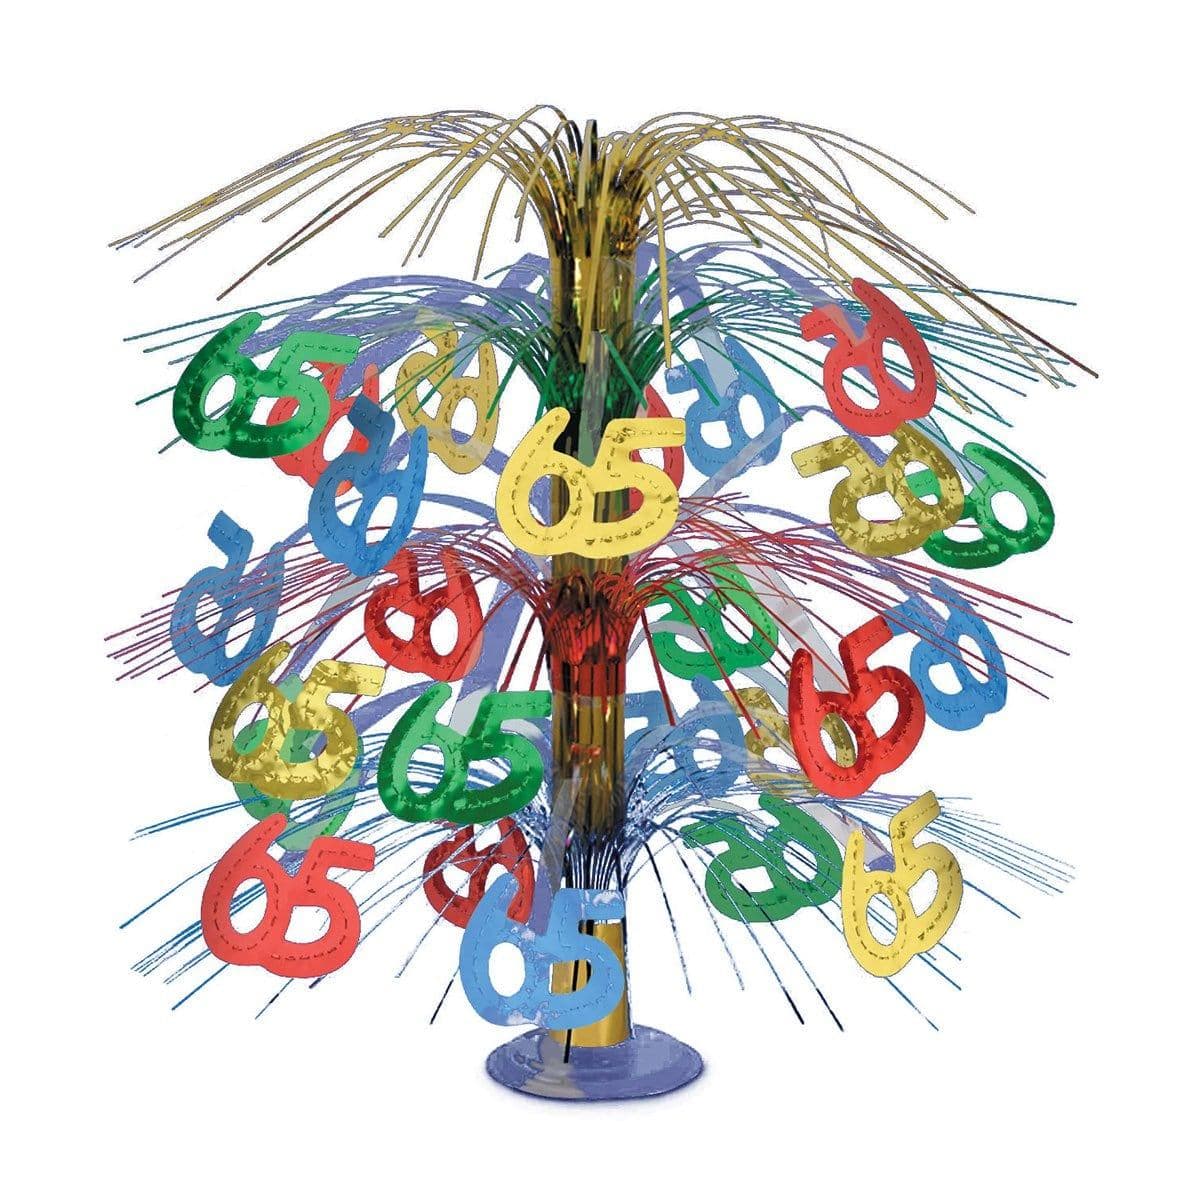 Buy Age Specific Birthday Cascade Centerpiece Multiclr - 65th Birthday 18 In. sold at Party Expert